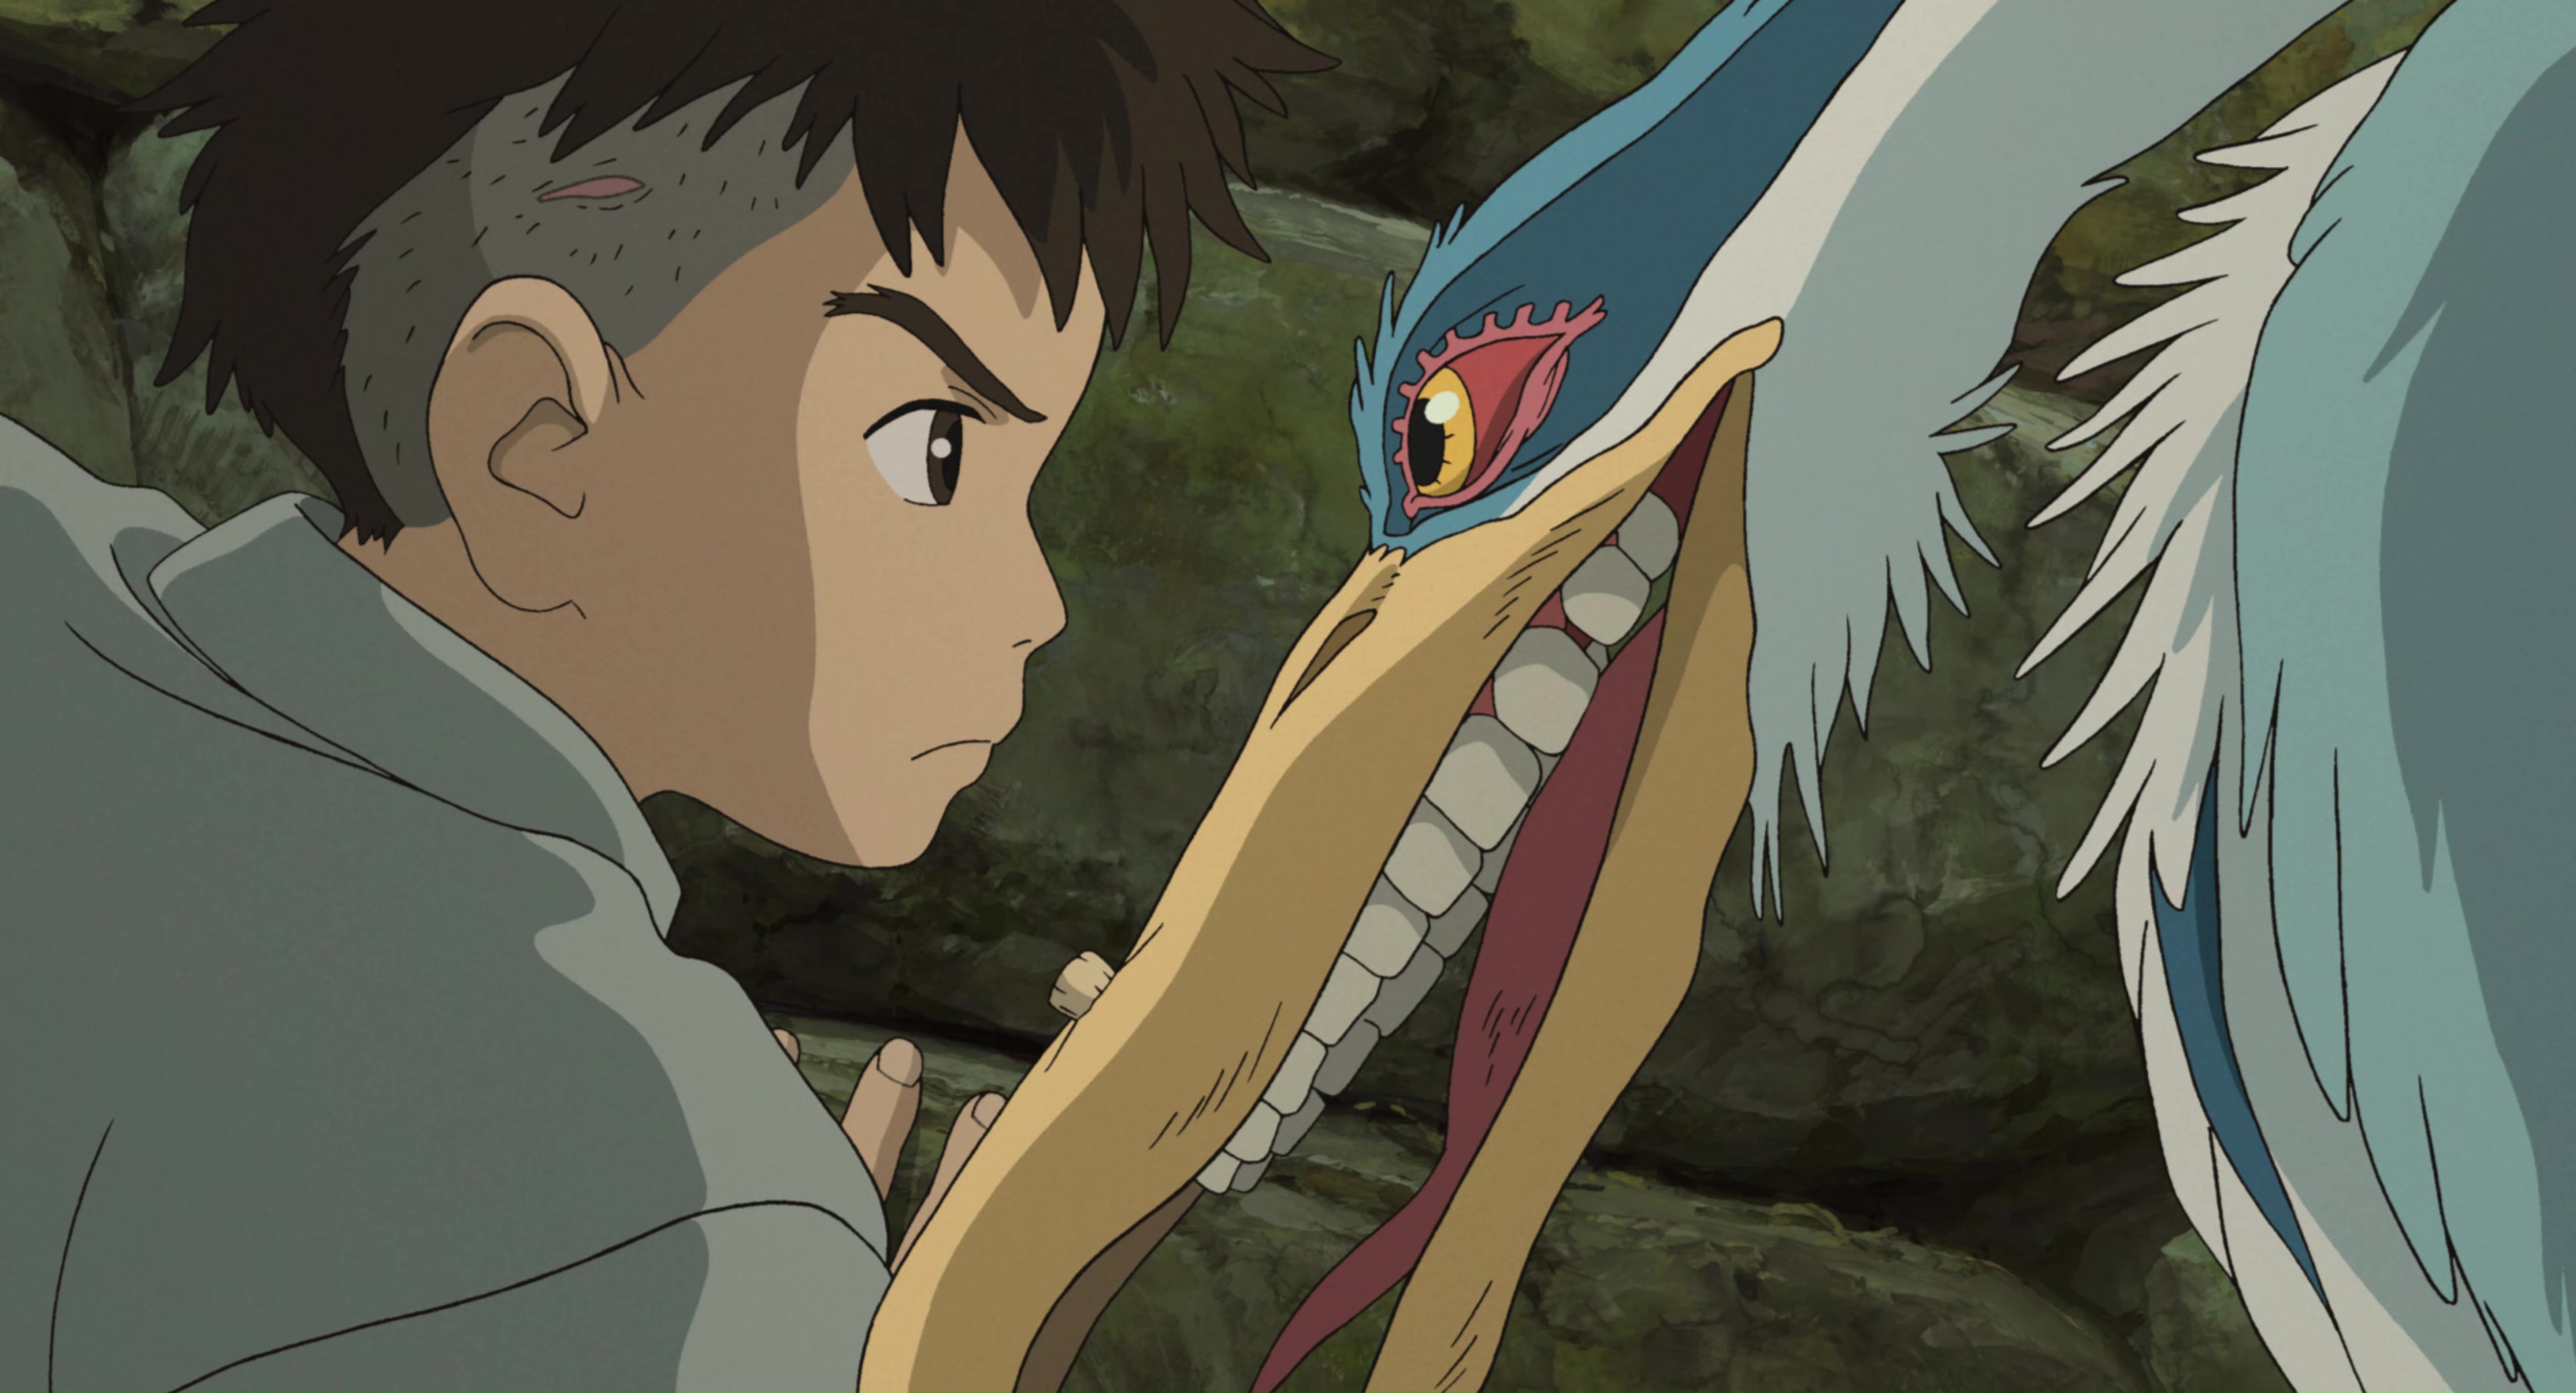 Mahito and a grey heron with disturbing human teeth glare at each other face to face in Hayao Miyazaki’s anime movie The Boy and the Heron